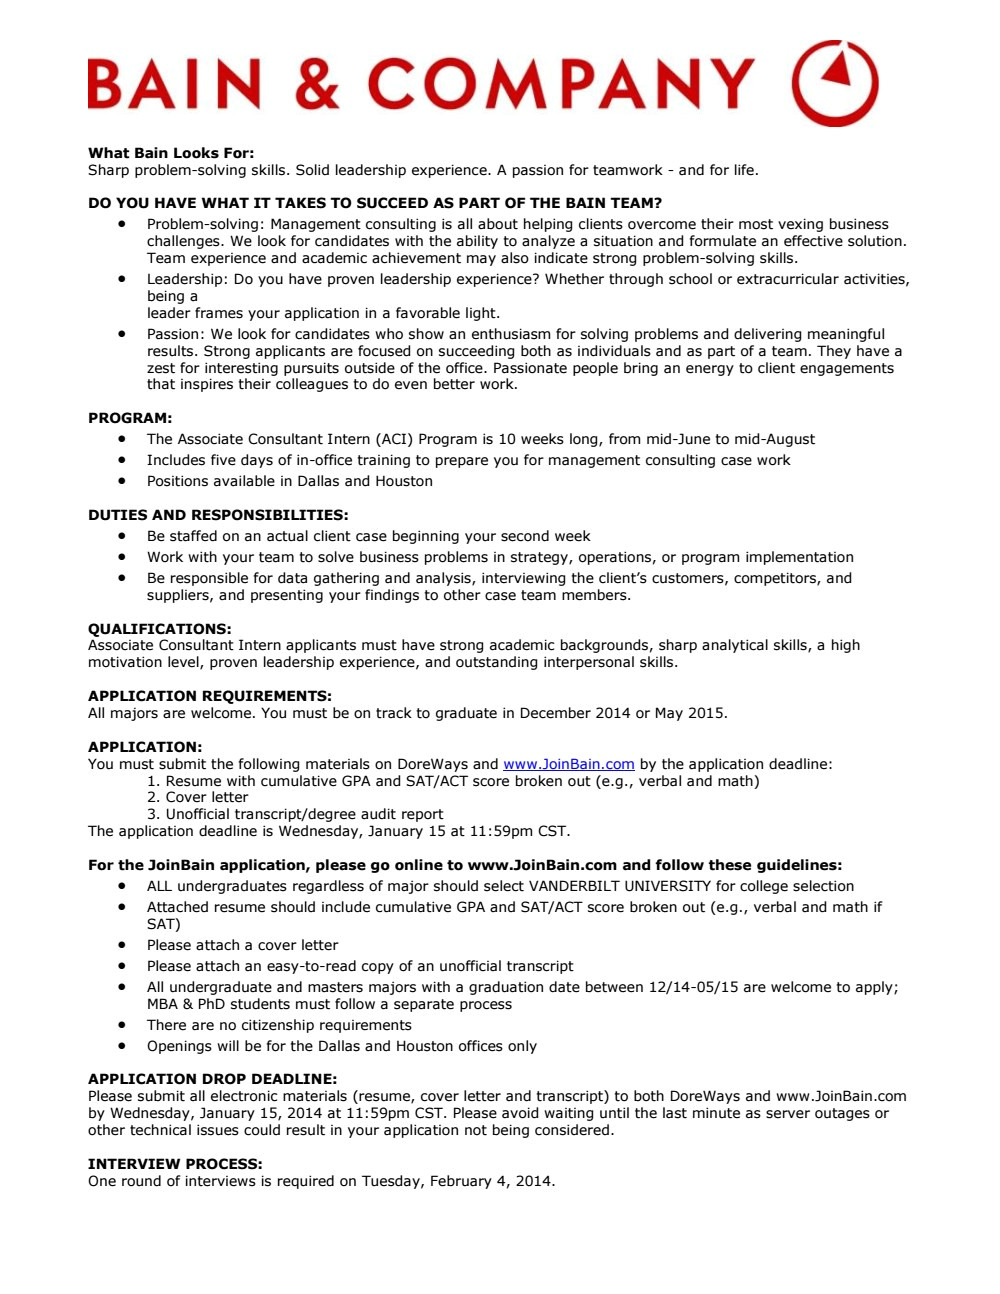 bain and company sample cover letter